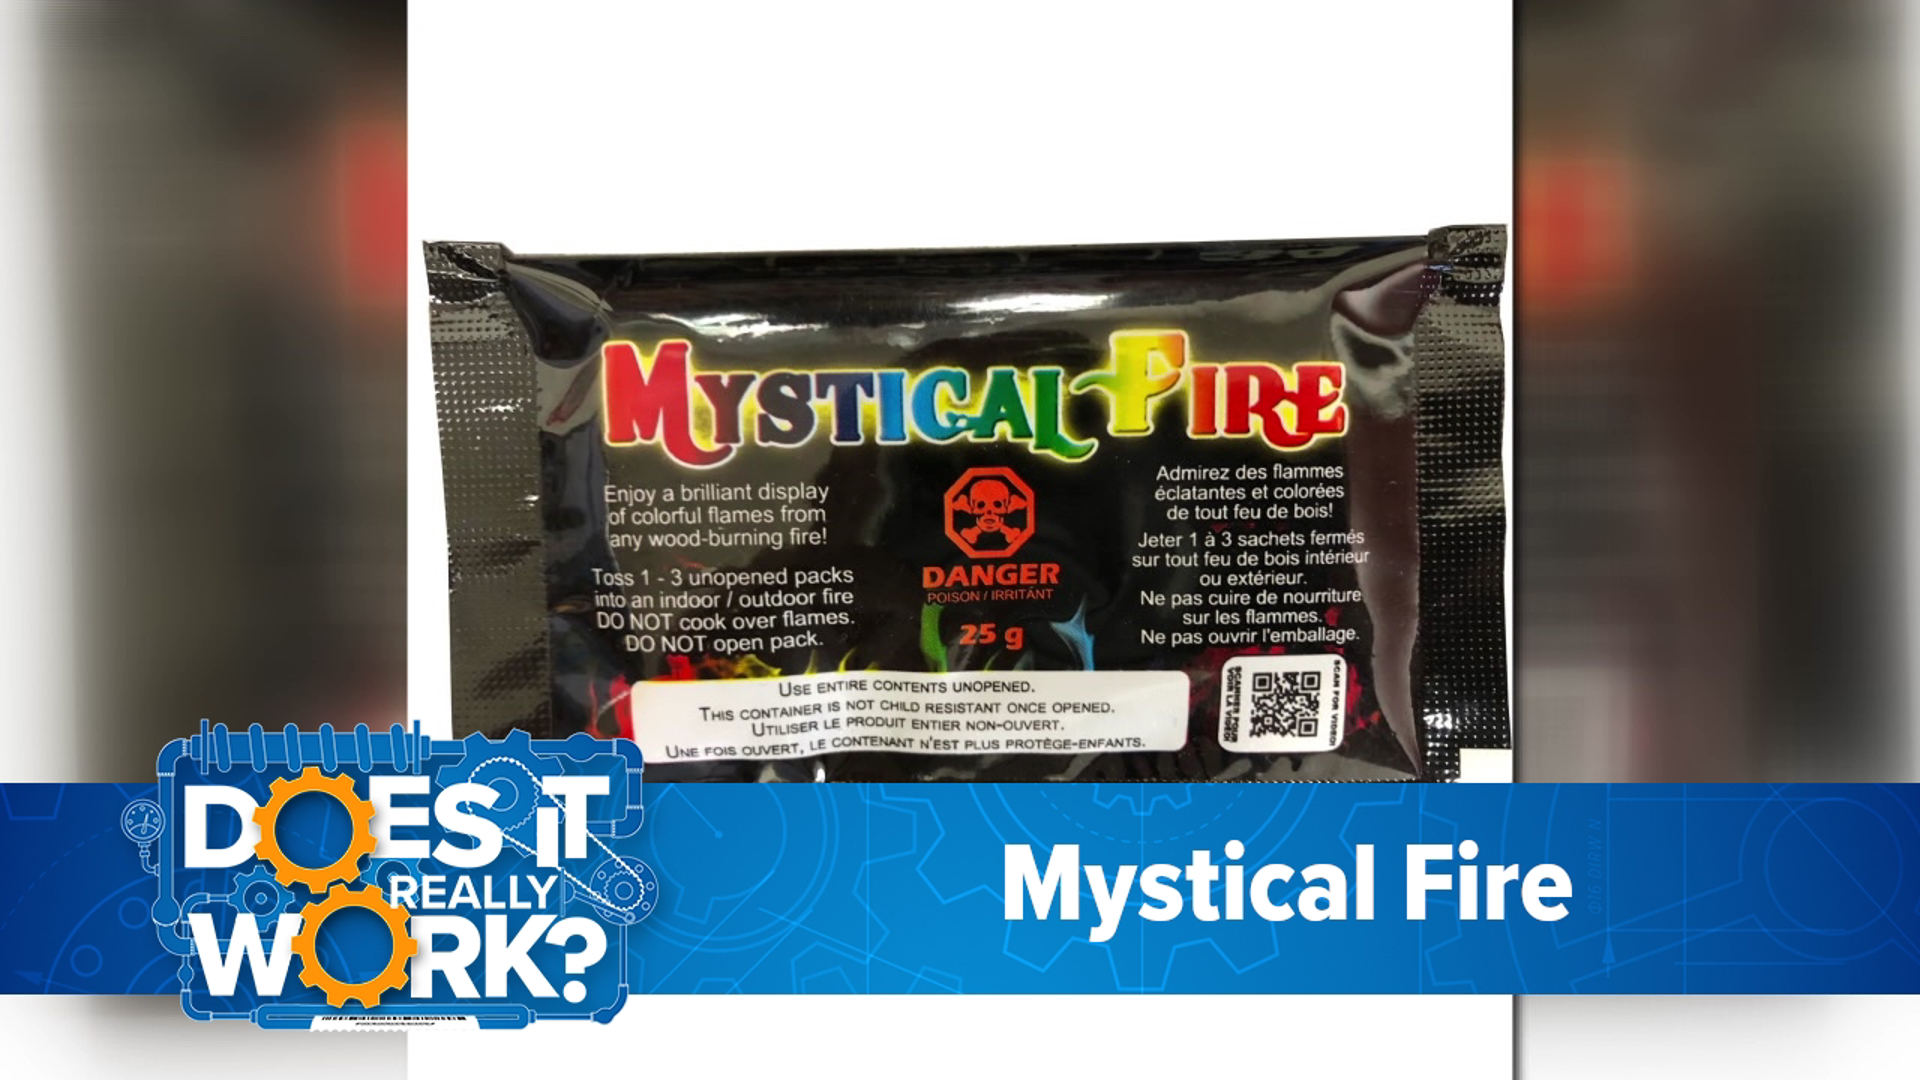 Mystical Fire pouches claim to add brilliant colors to your indoor or outdoor fires this summer.